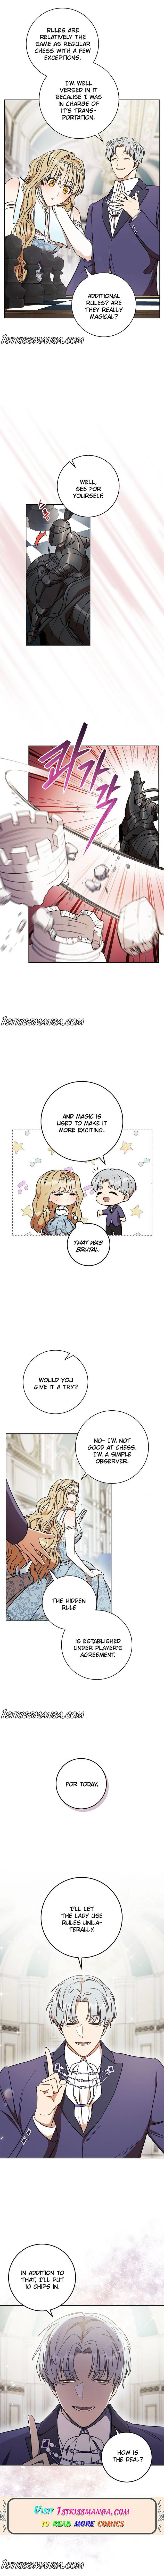 One Pair Lady Chapter 9 page 9